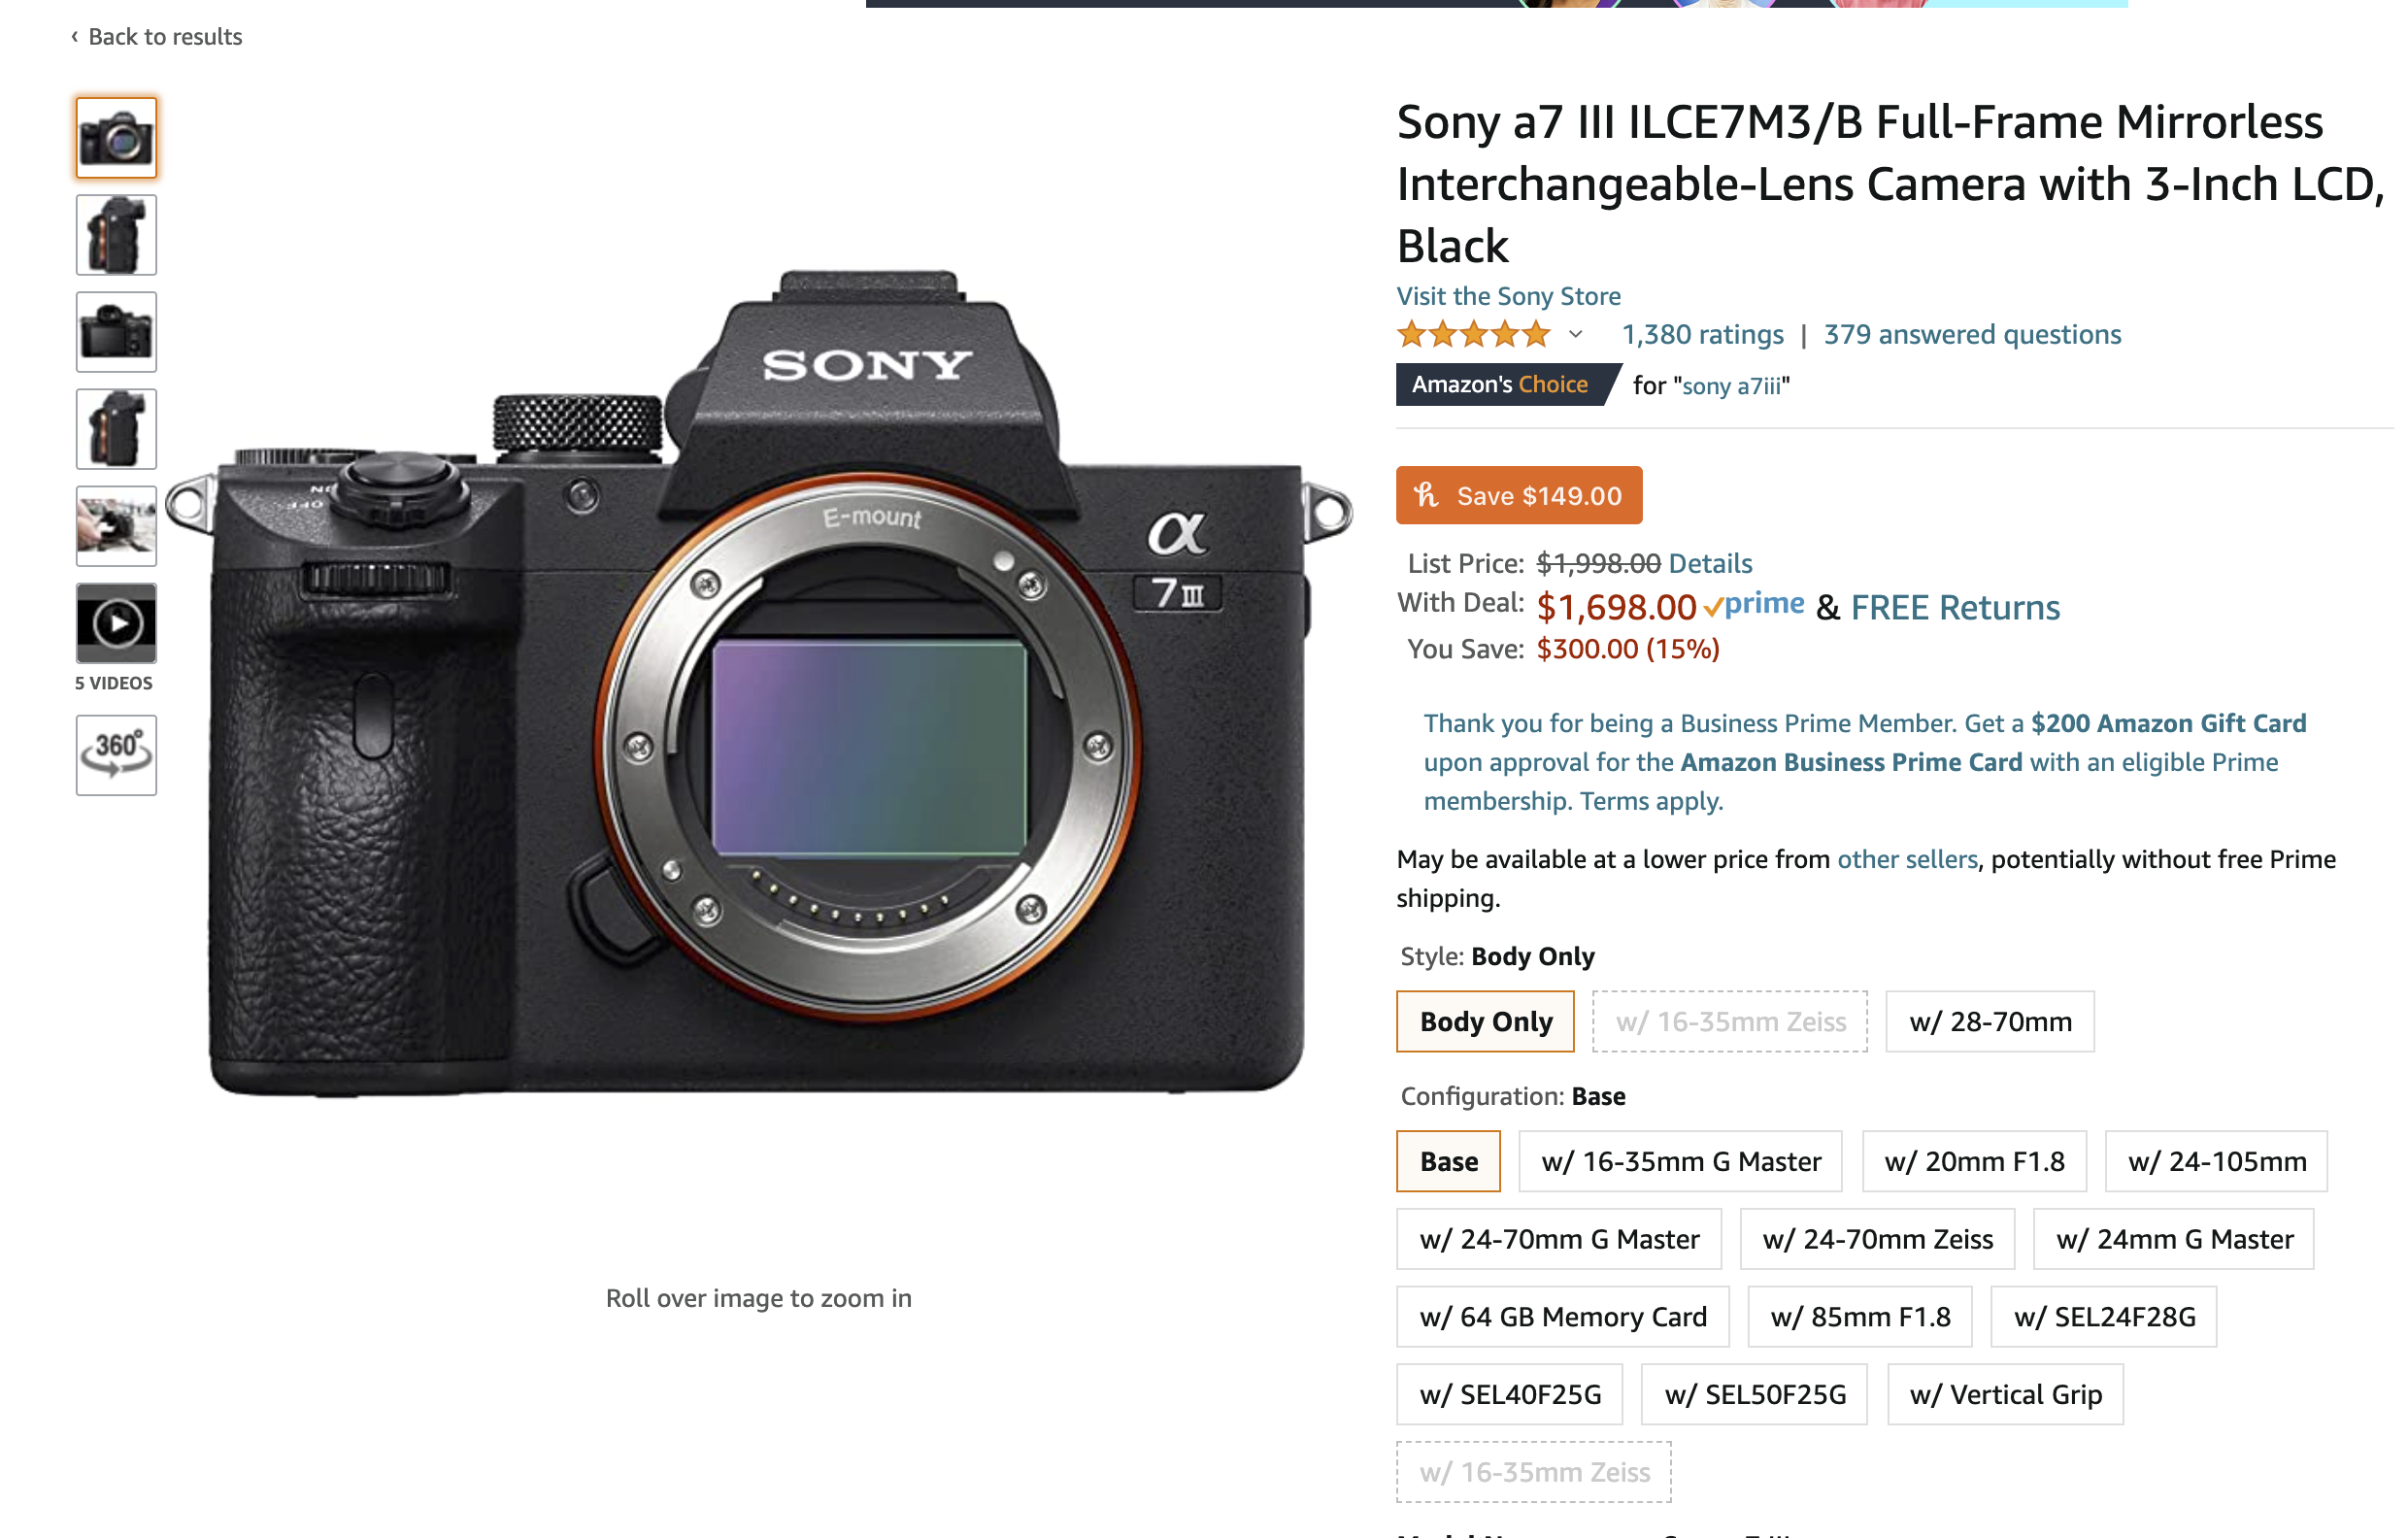 There’s a Limited Time Deal on the Sony a7 III Right Now